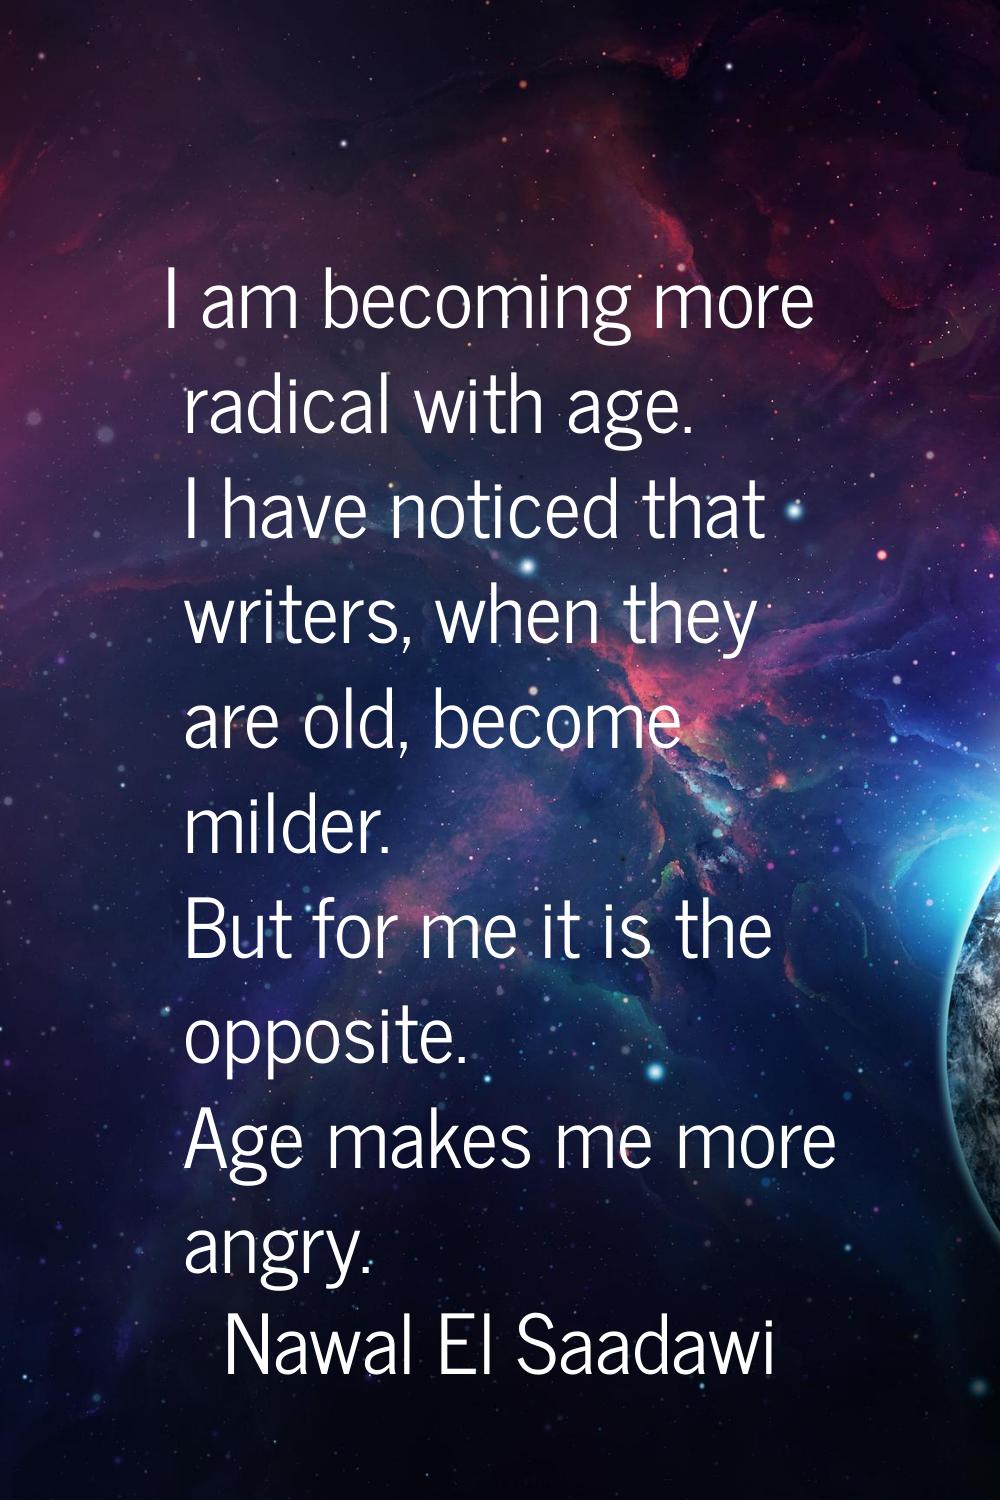 I am becoming more radical with age. I have noticed that writers, when they are old, become milder.